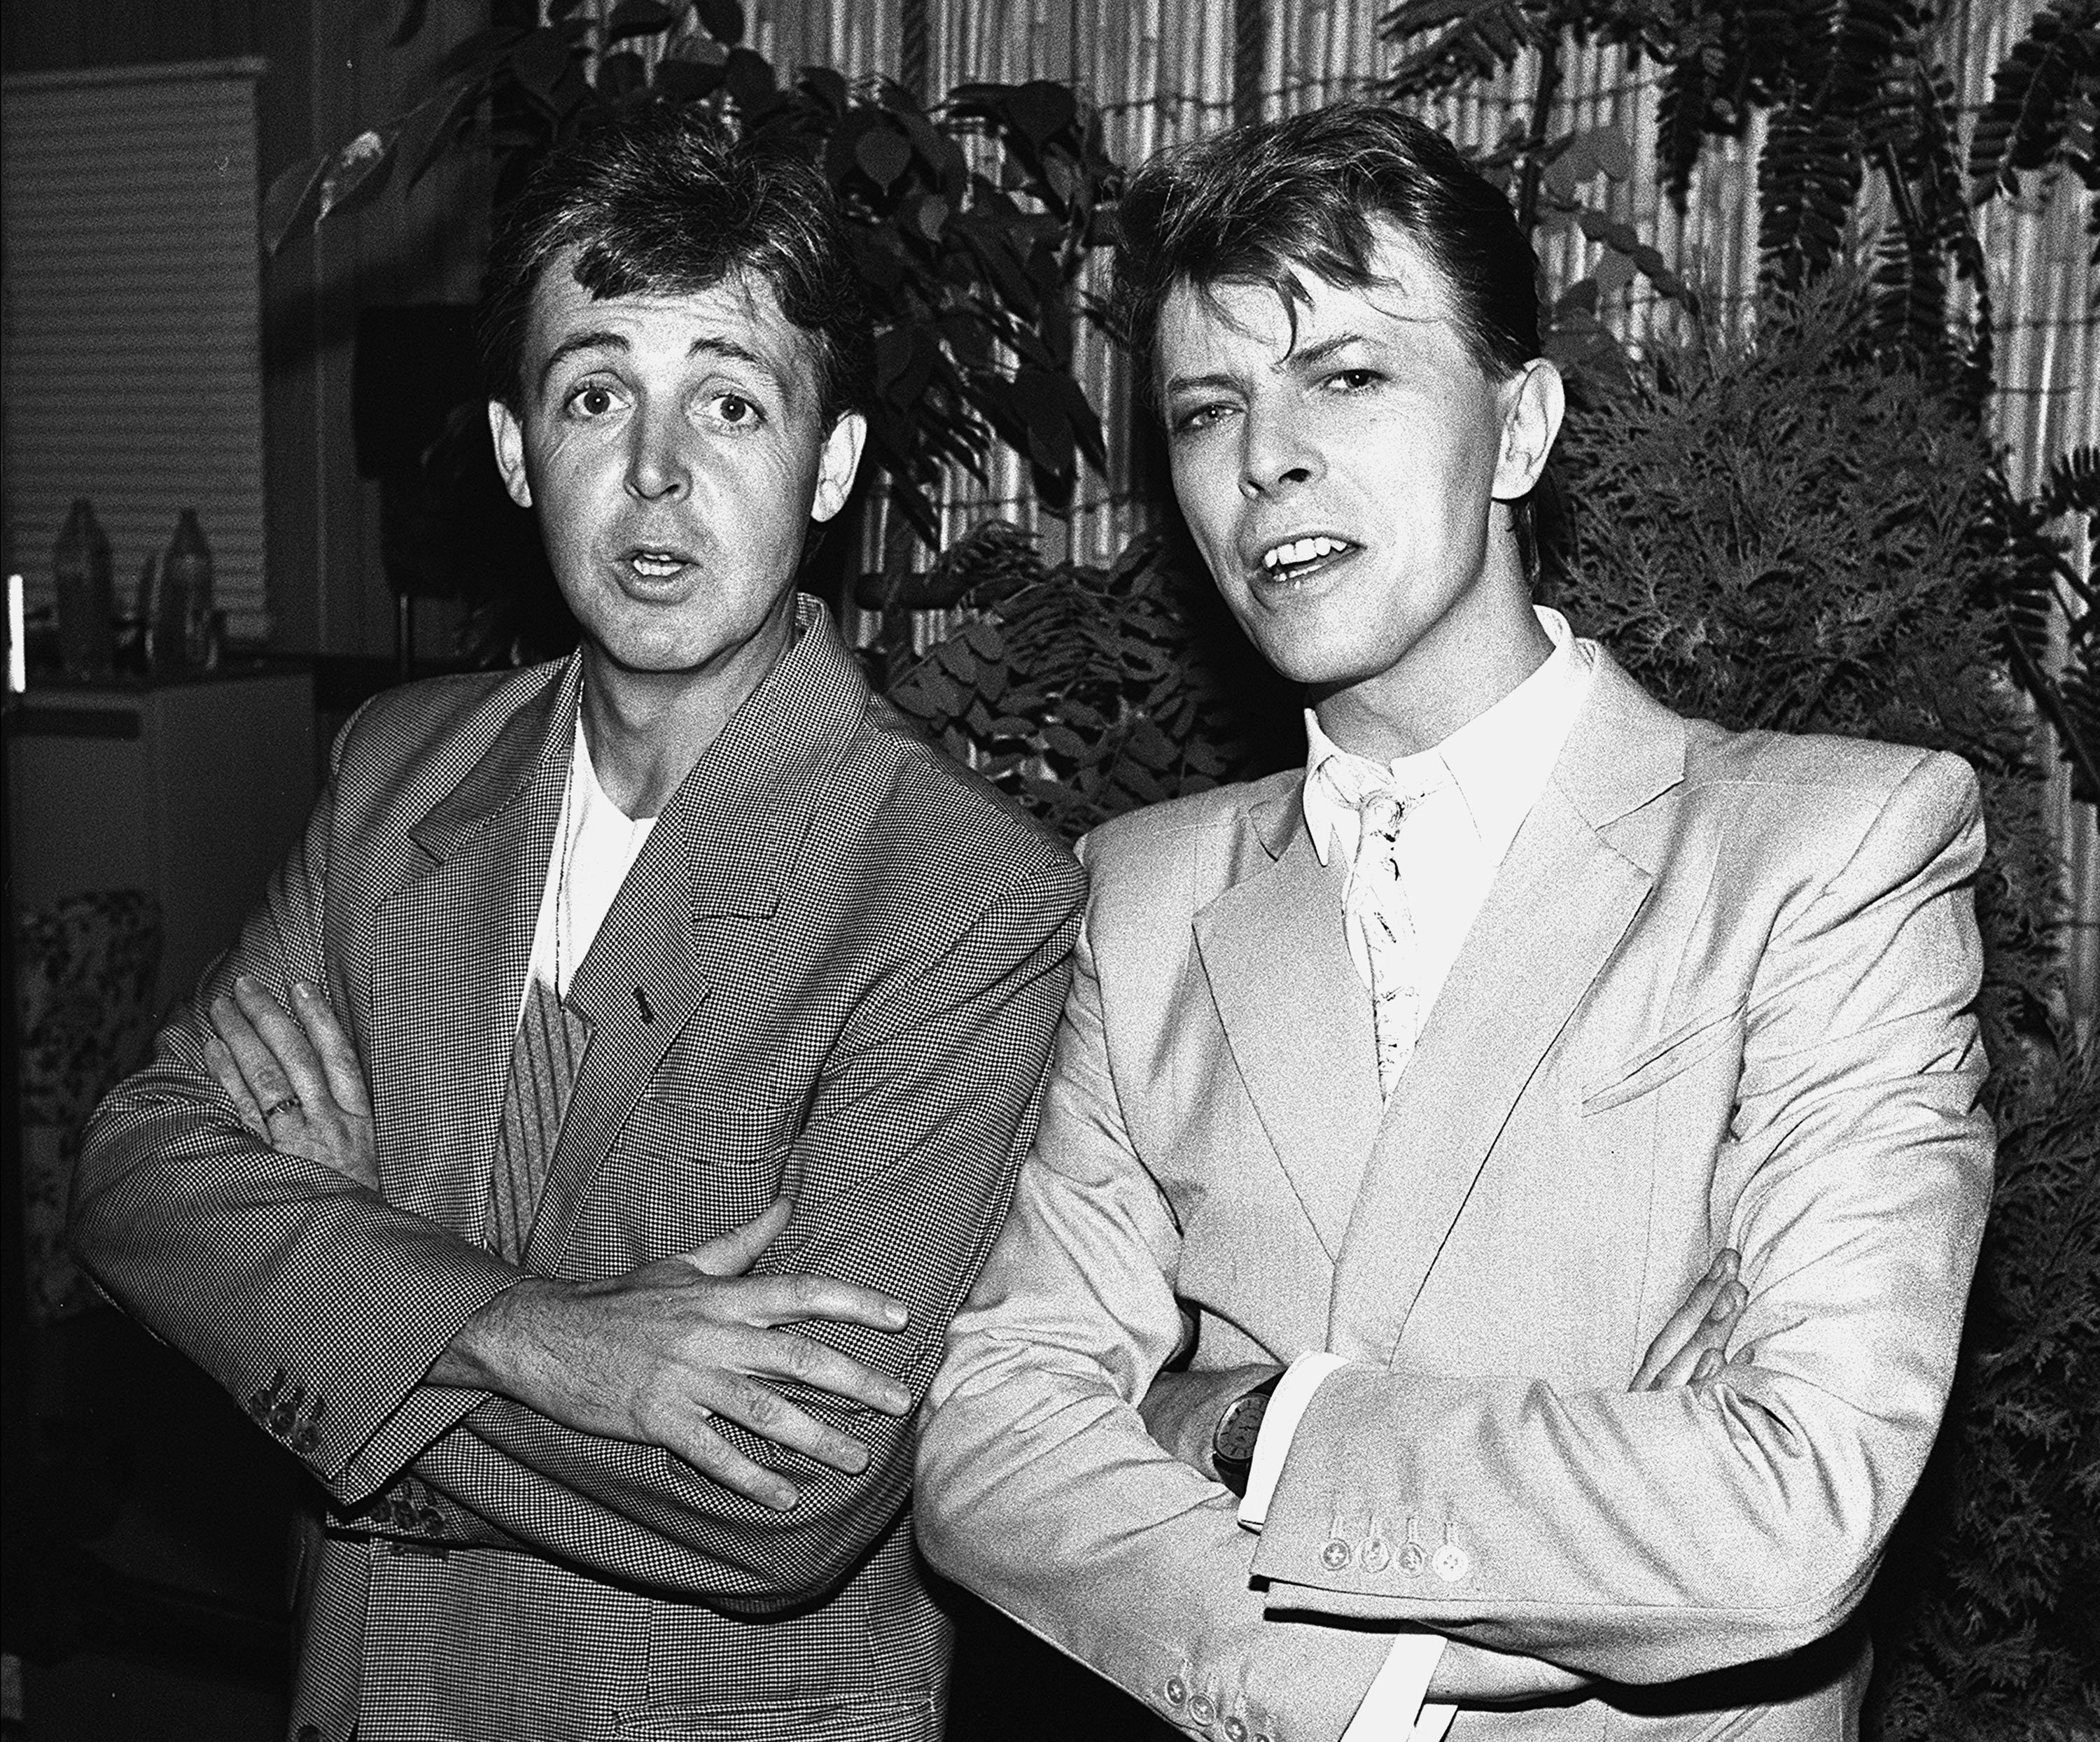 Paul McCartney and David Bowie in suits